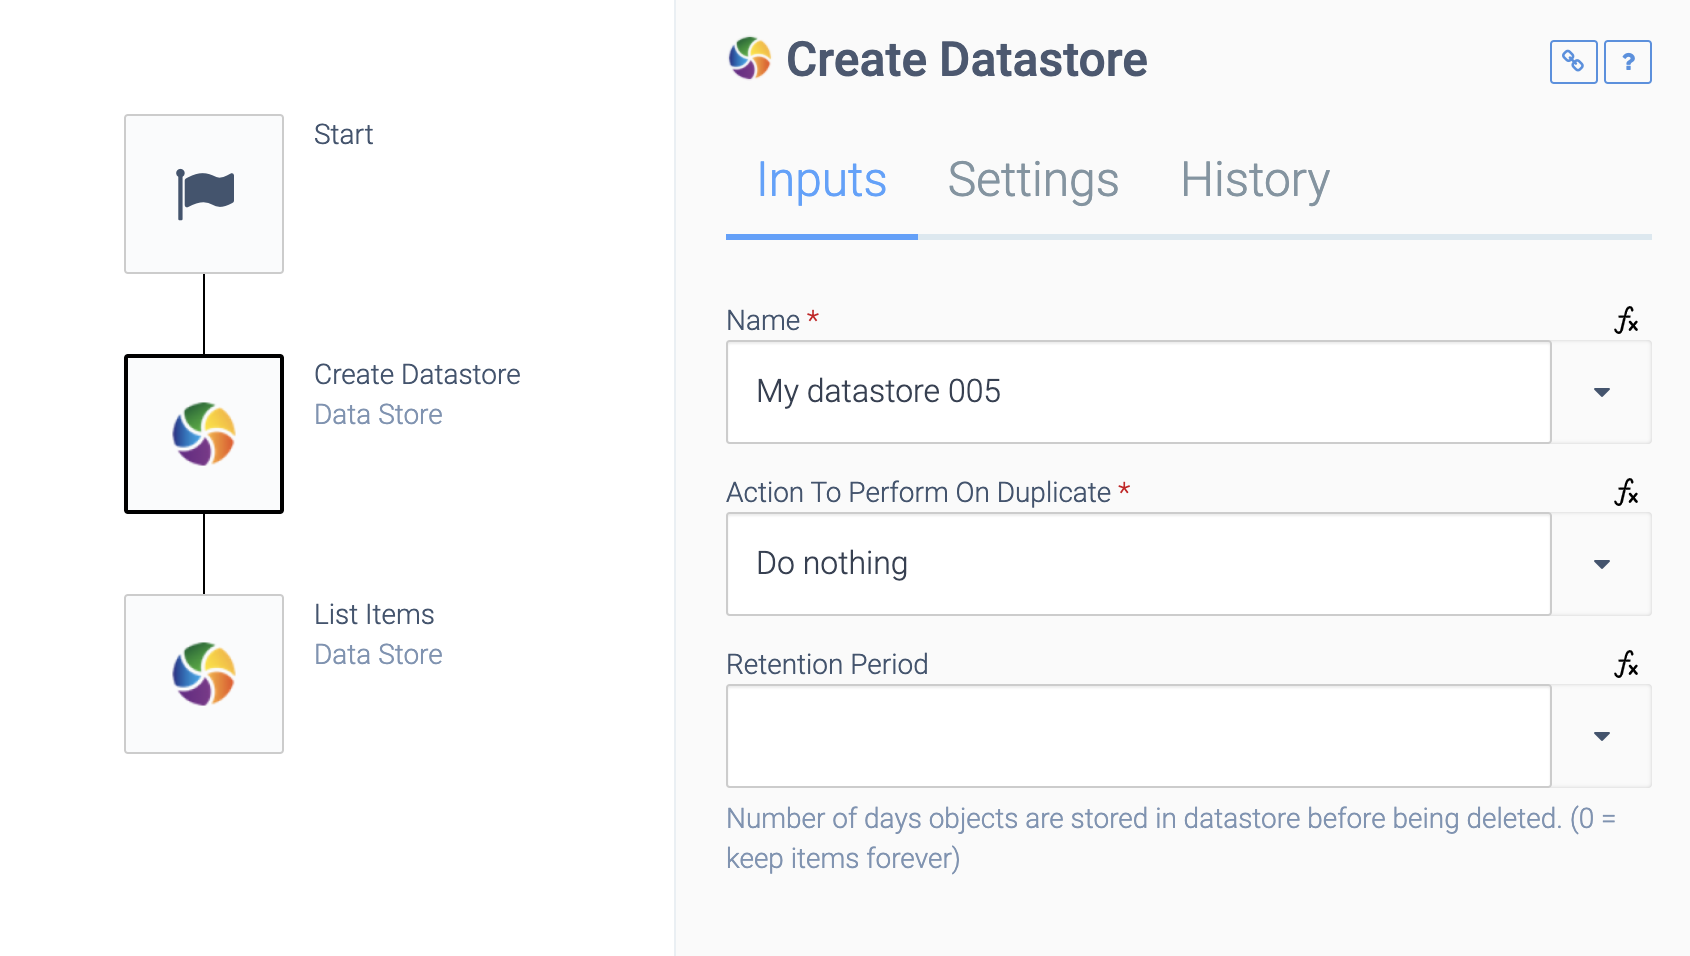 an automation consisting of a Start block, a Create Datastore block, and a List Items block. The Create Datastore block is selected. The Name field is set to My Datastore, and Action To Perform On Duplicate is set to Do nothing.